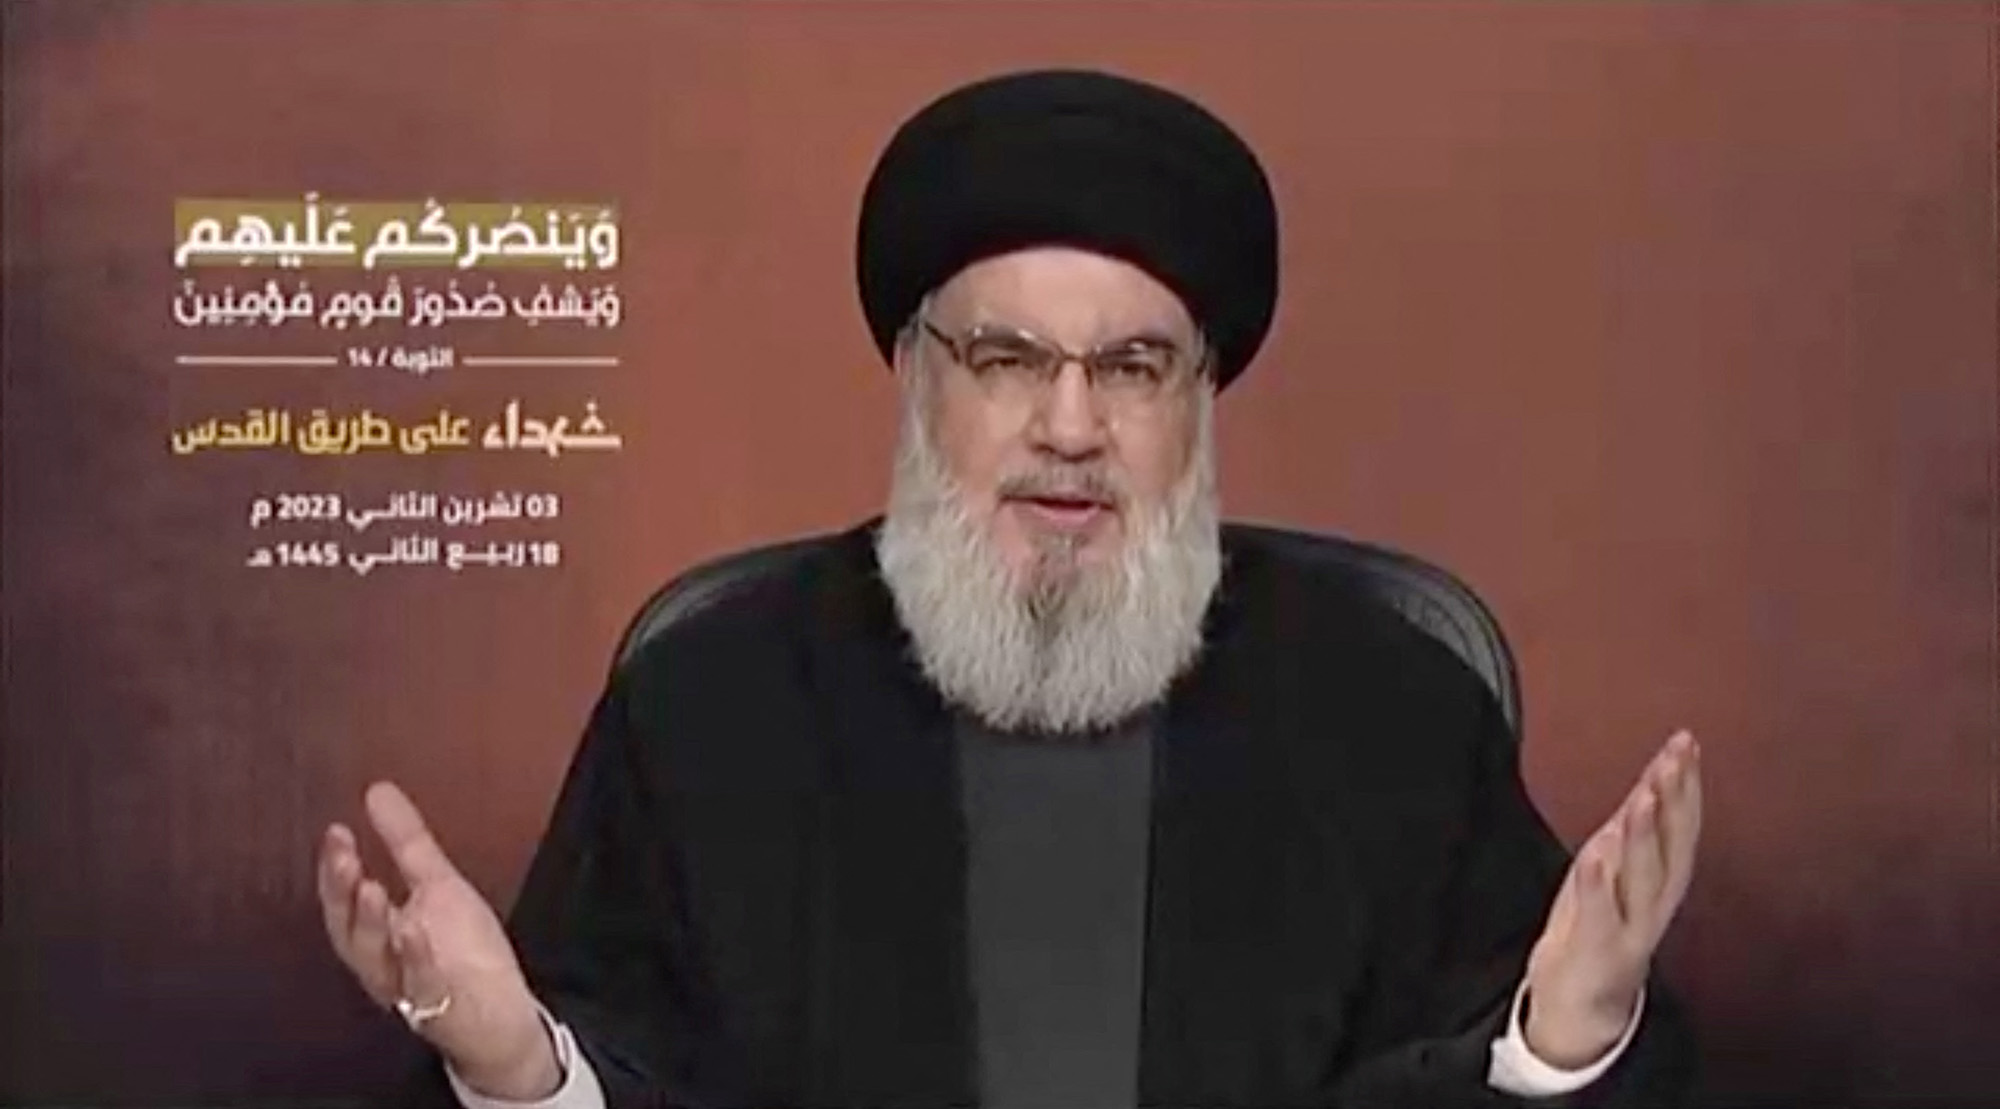 Hezbollah leader Sayyed Hassan Nasrallah delivers his first address since the October conflict between Palestinian group Hamas and Israel, from an unspecified location in Lebanon, in this screenshot taken from video obtained on November 3.